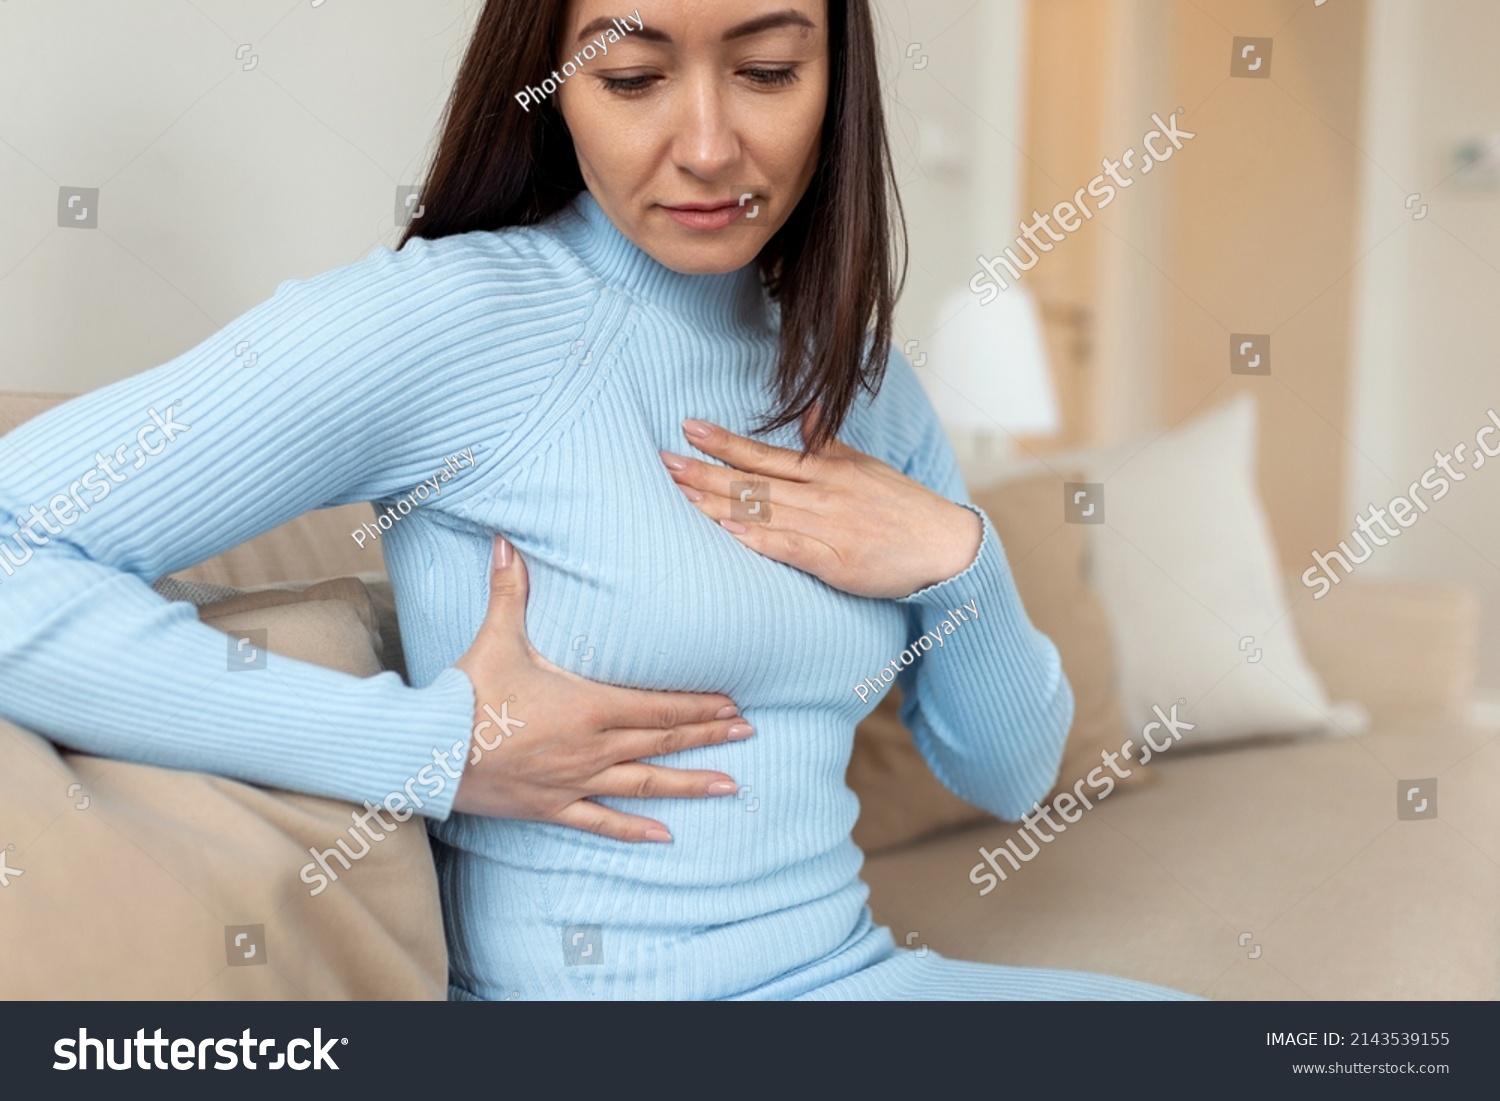 Asian Woman checking lumps on her breast for signs of cancer. woman is suffering from pain in the breast. BSE or Breast Self-Exam. Guidelines to check for breast cancer. #2143539155